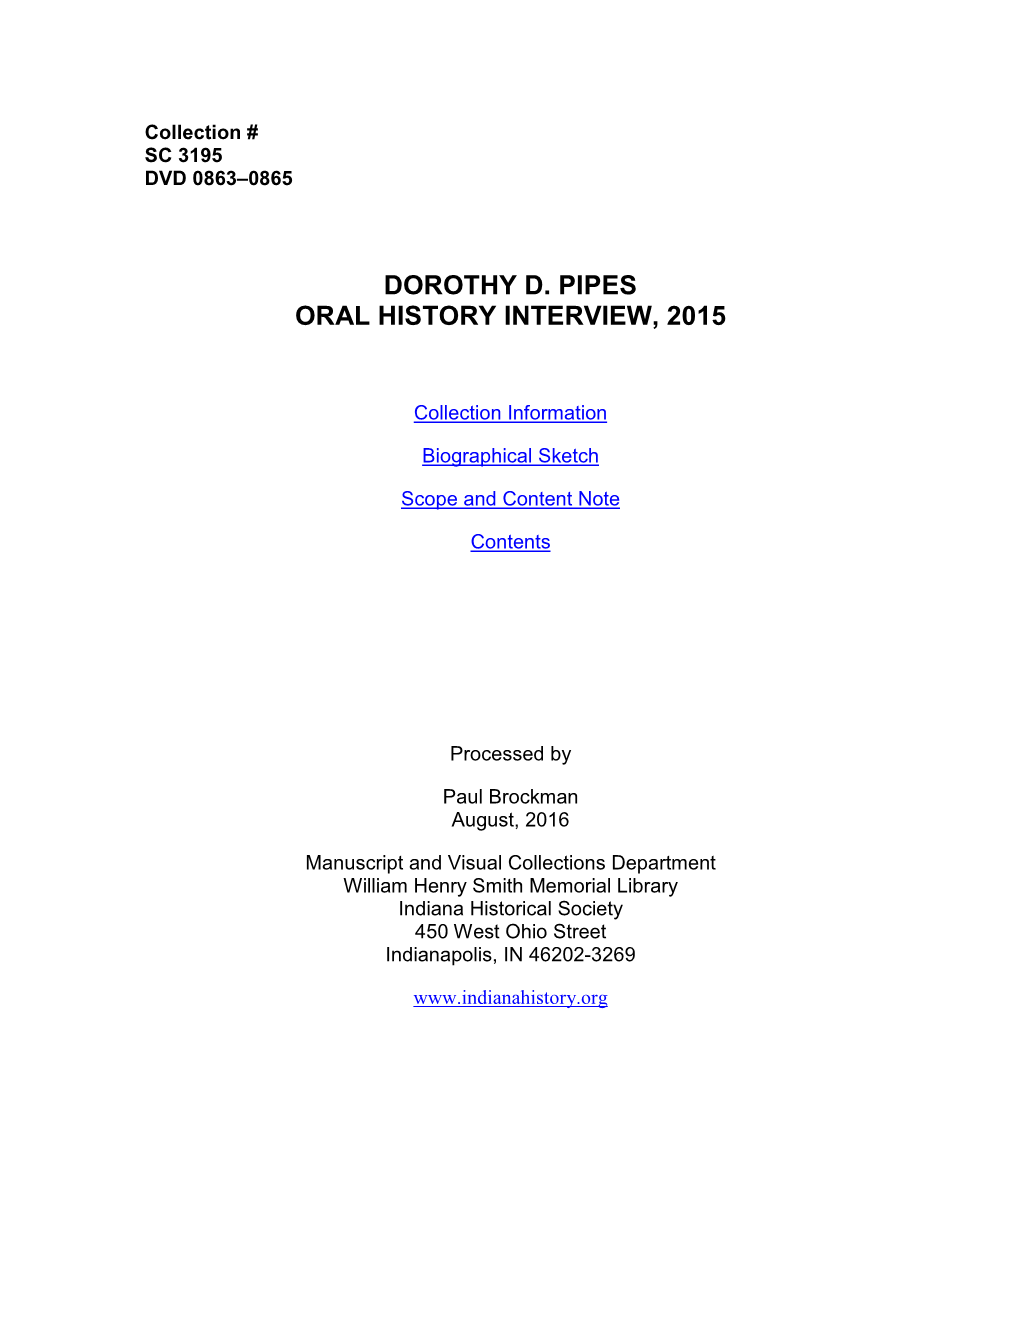 Dorothy D. Pipes Oral History Interview, 2015